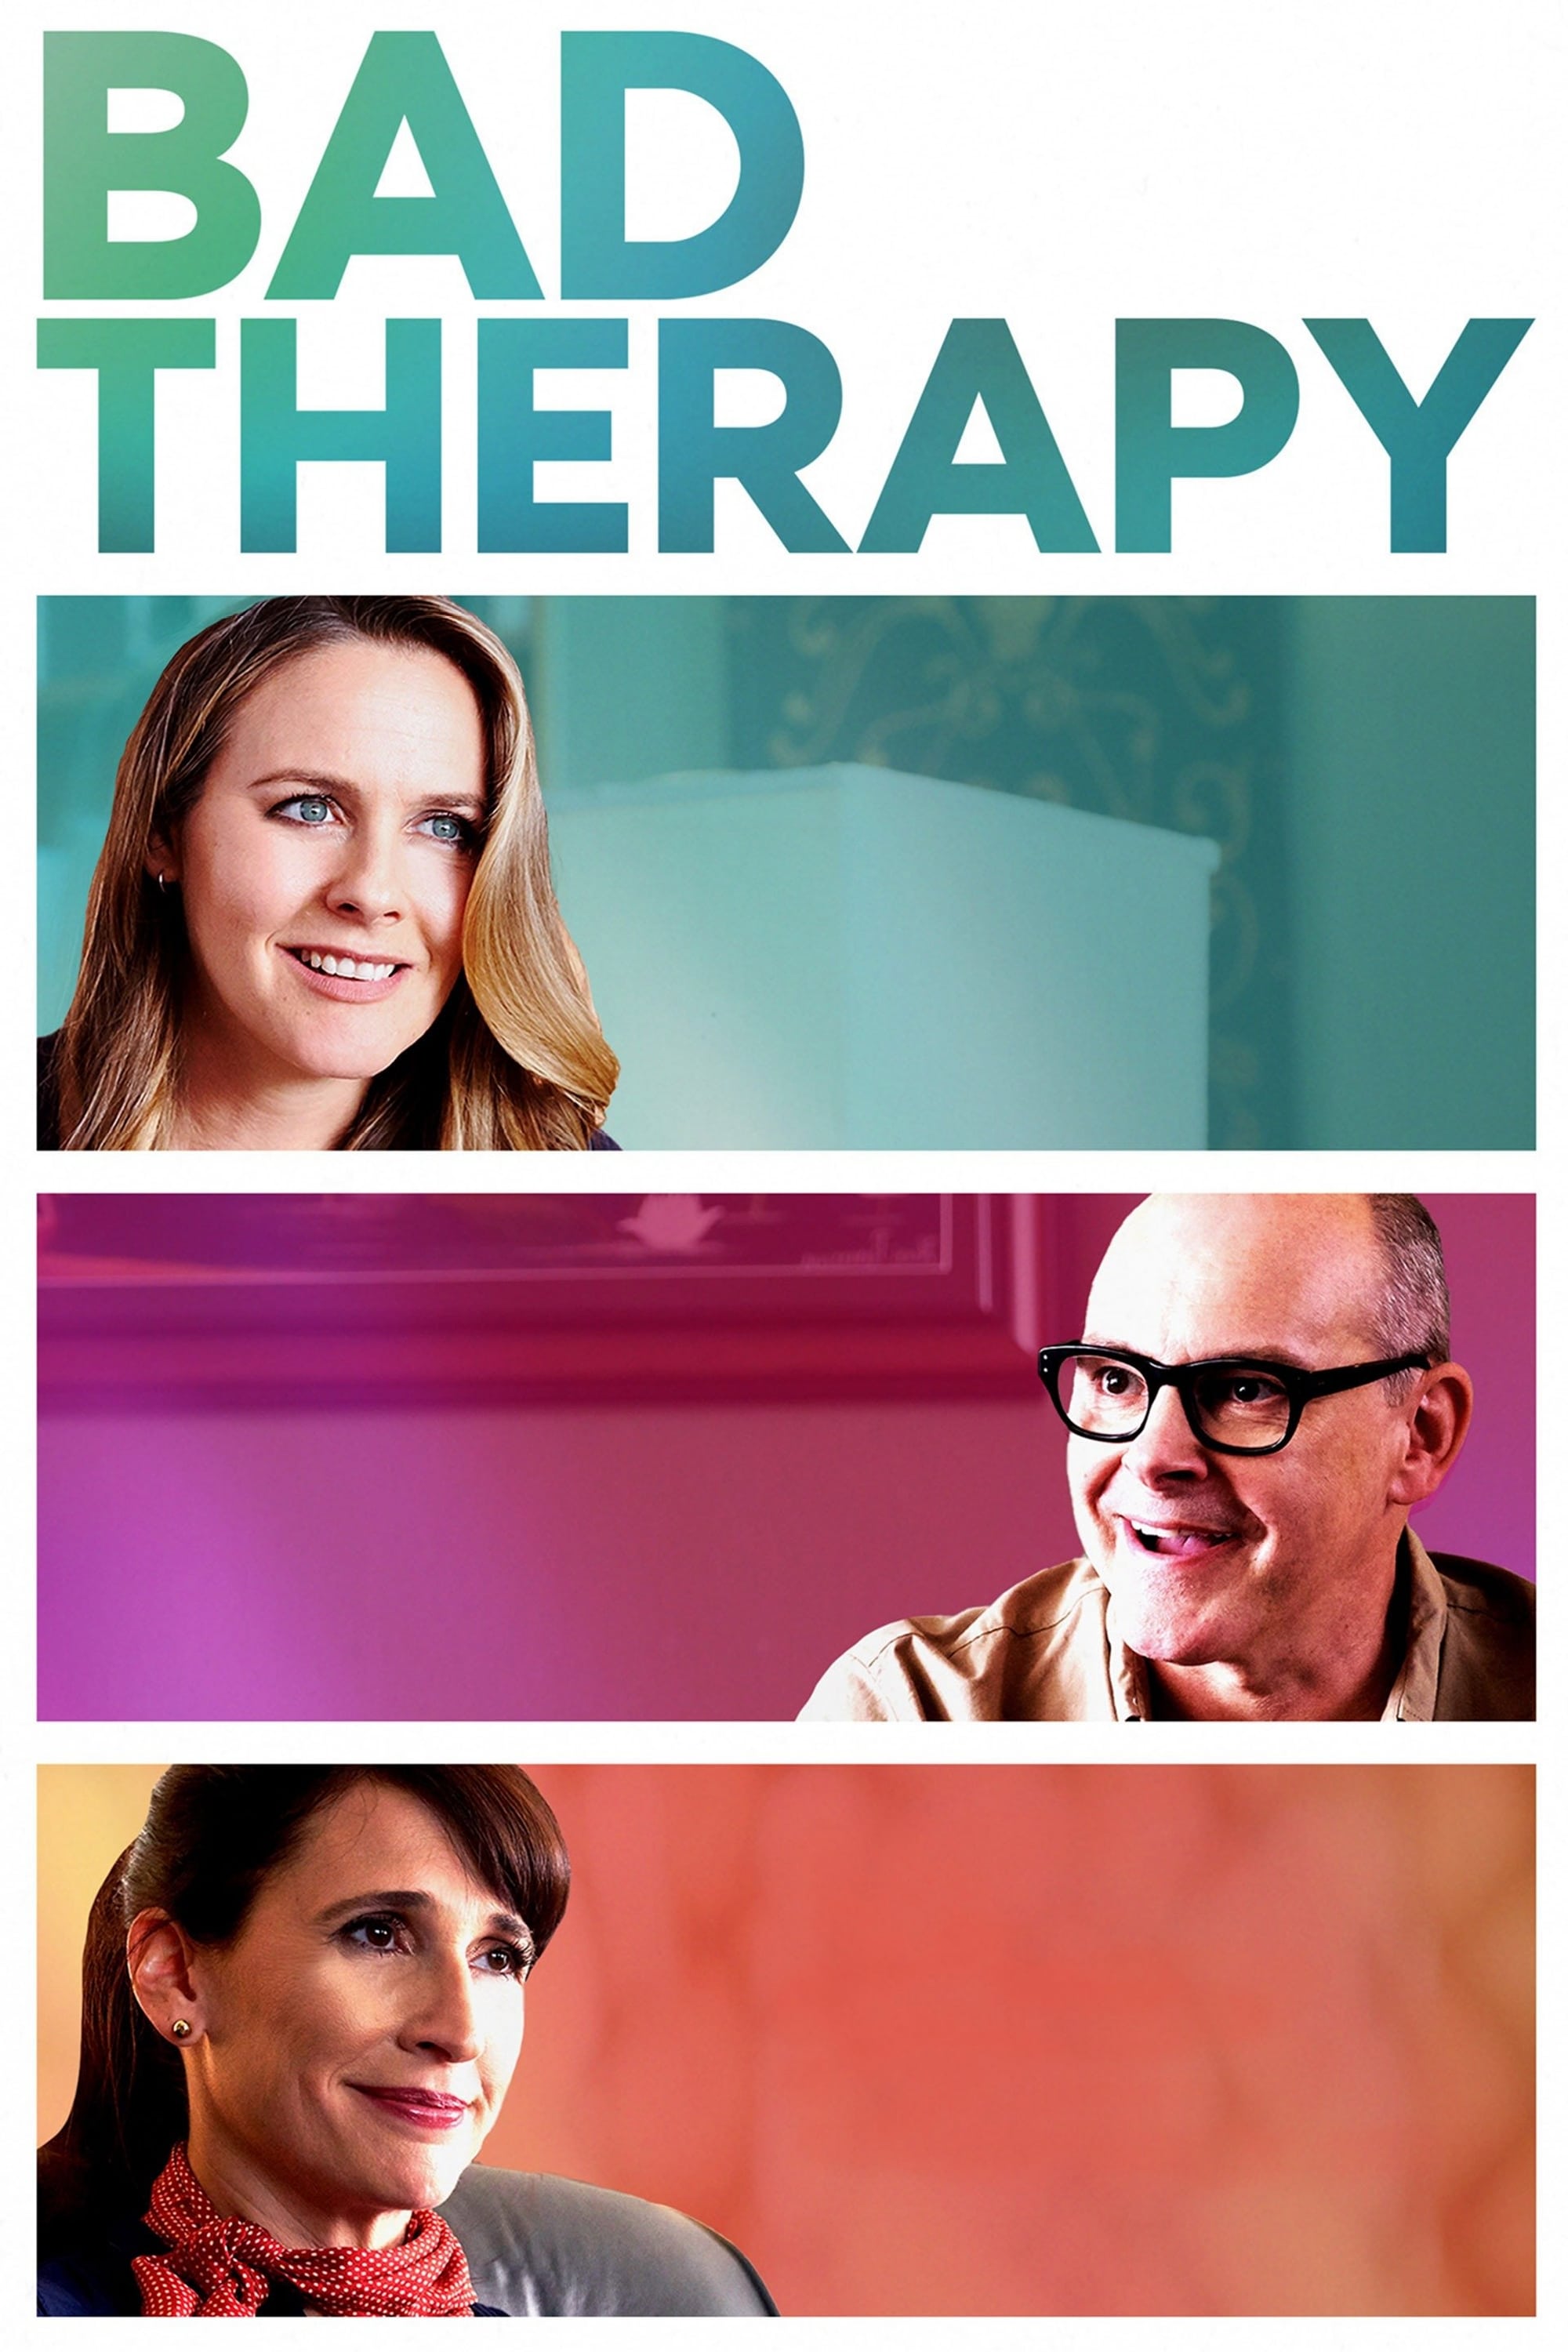 Bad Therapy film